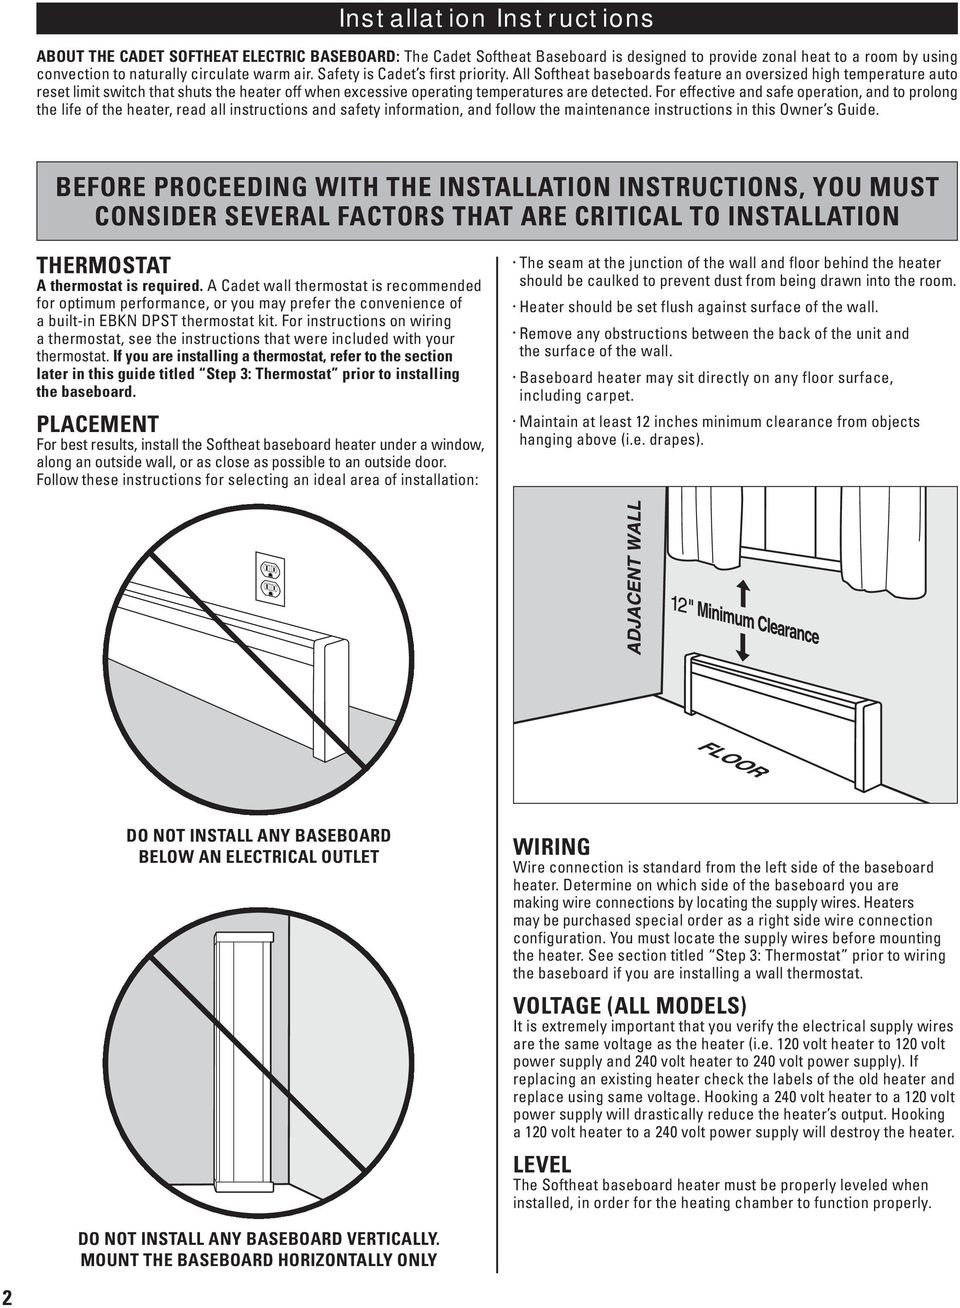 For effective and safe operation, and to prolong the life of the heater, read all instructions and safety information, and follow the maintenance instructions in this Owner s Guide.